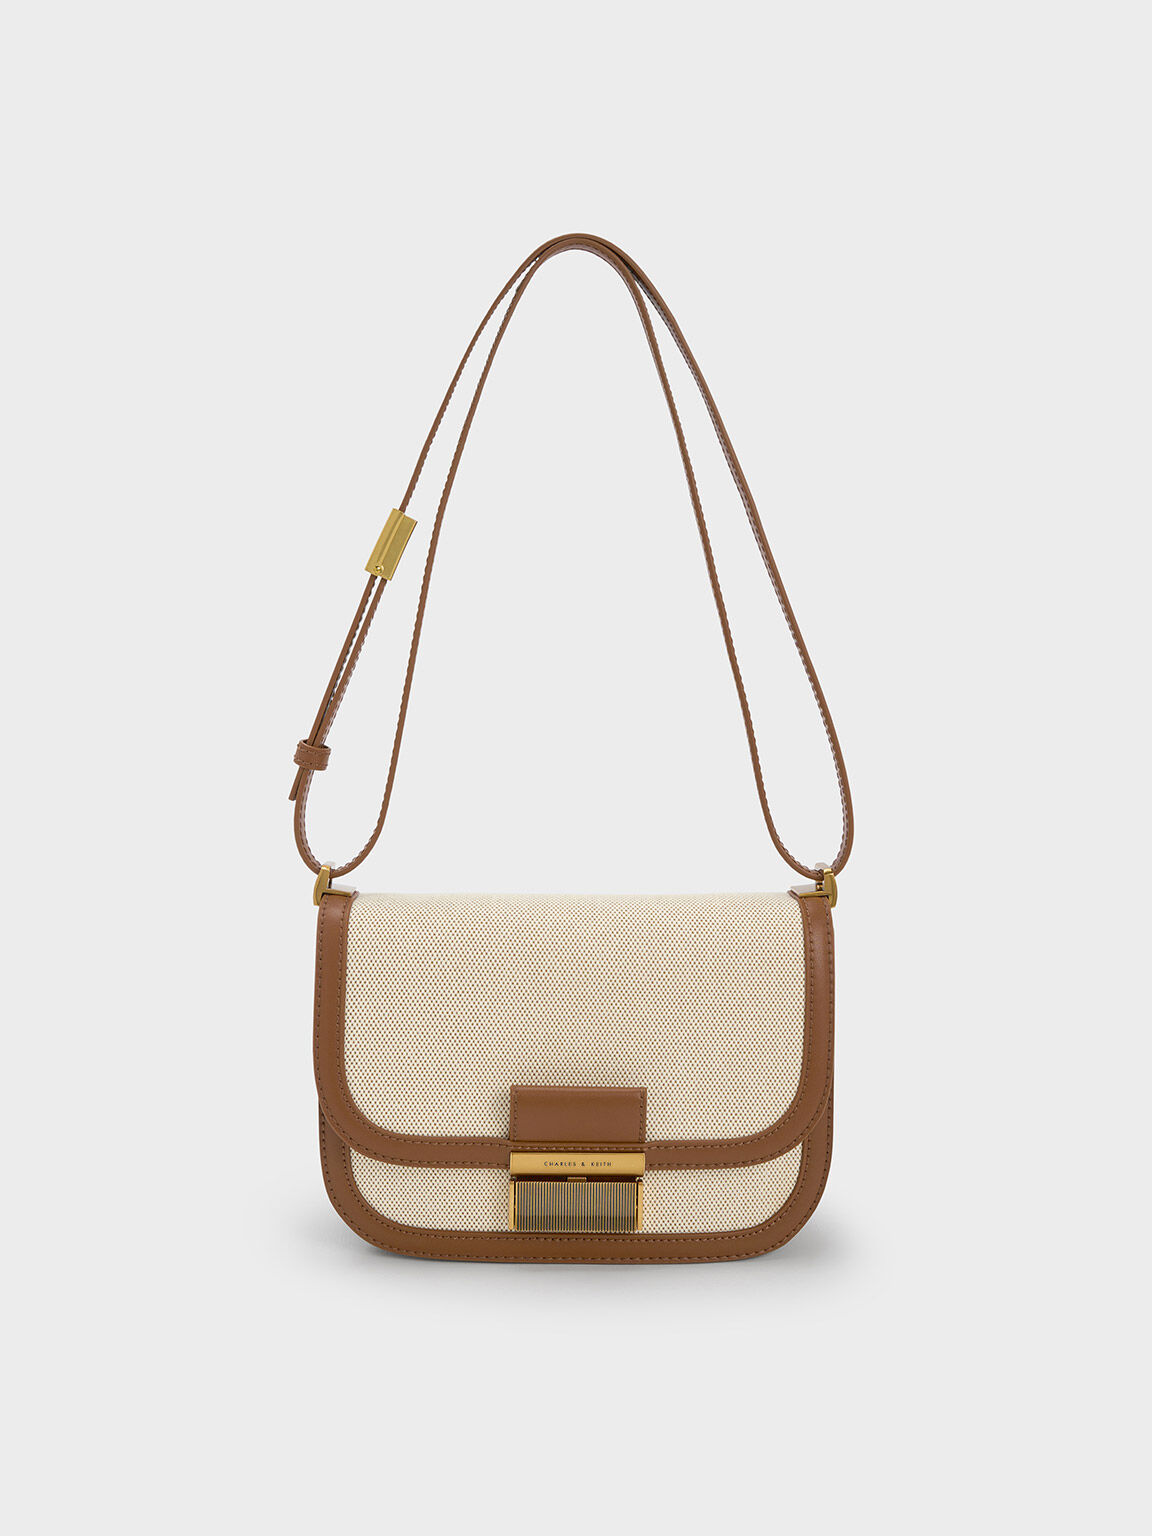 Brown Square Crossbody Bag With Chain Decoration And Flap Closure